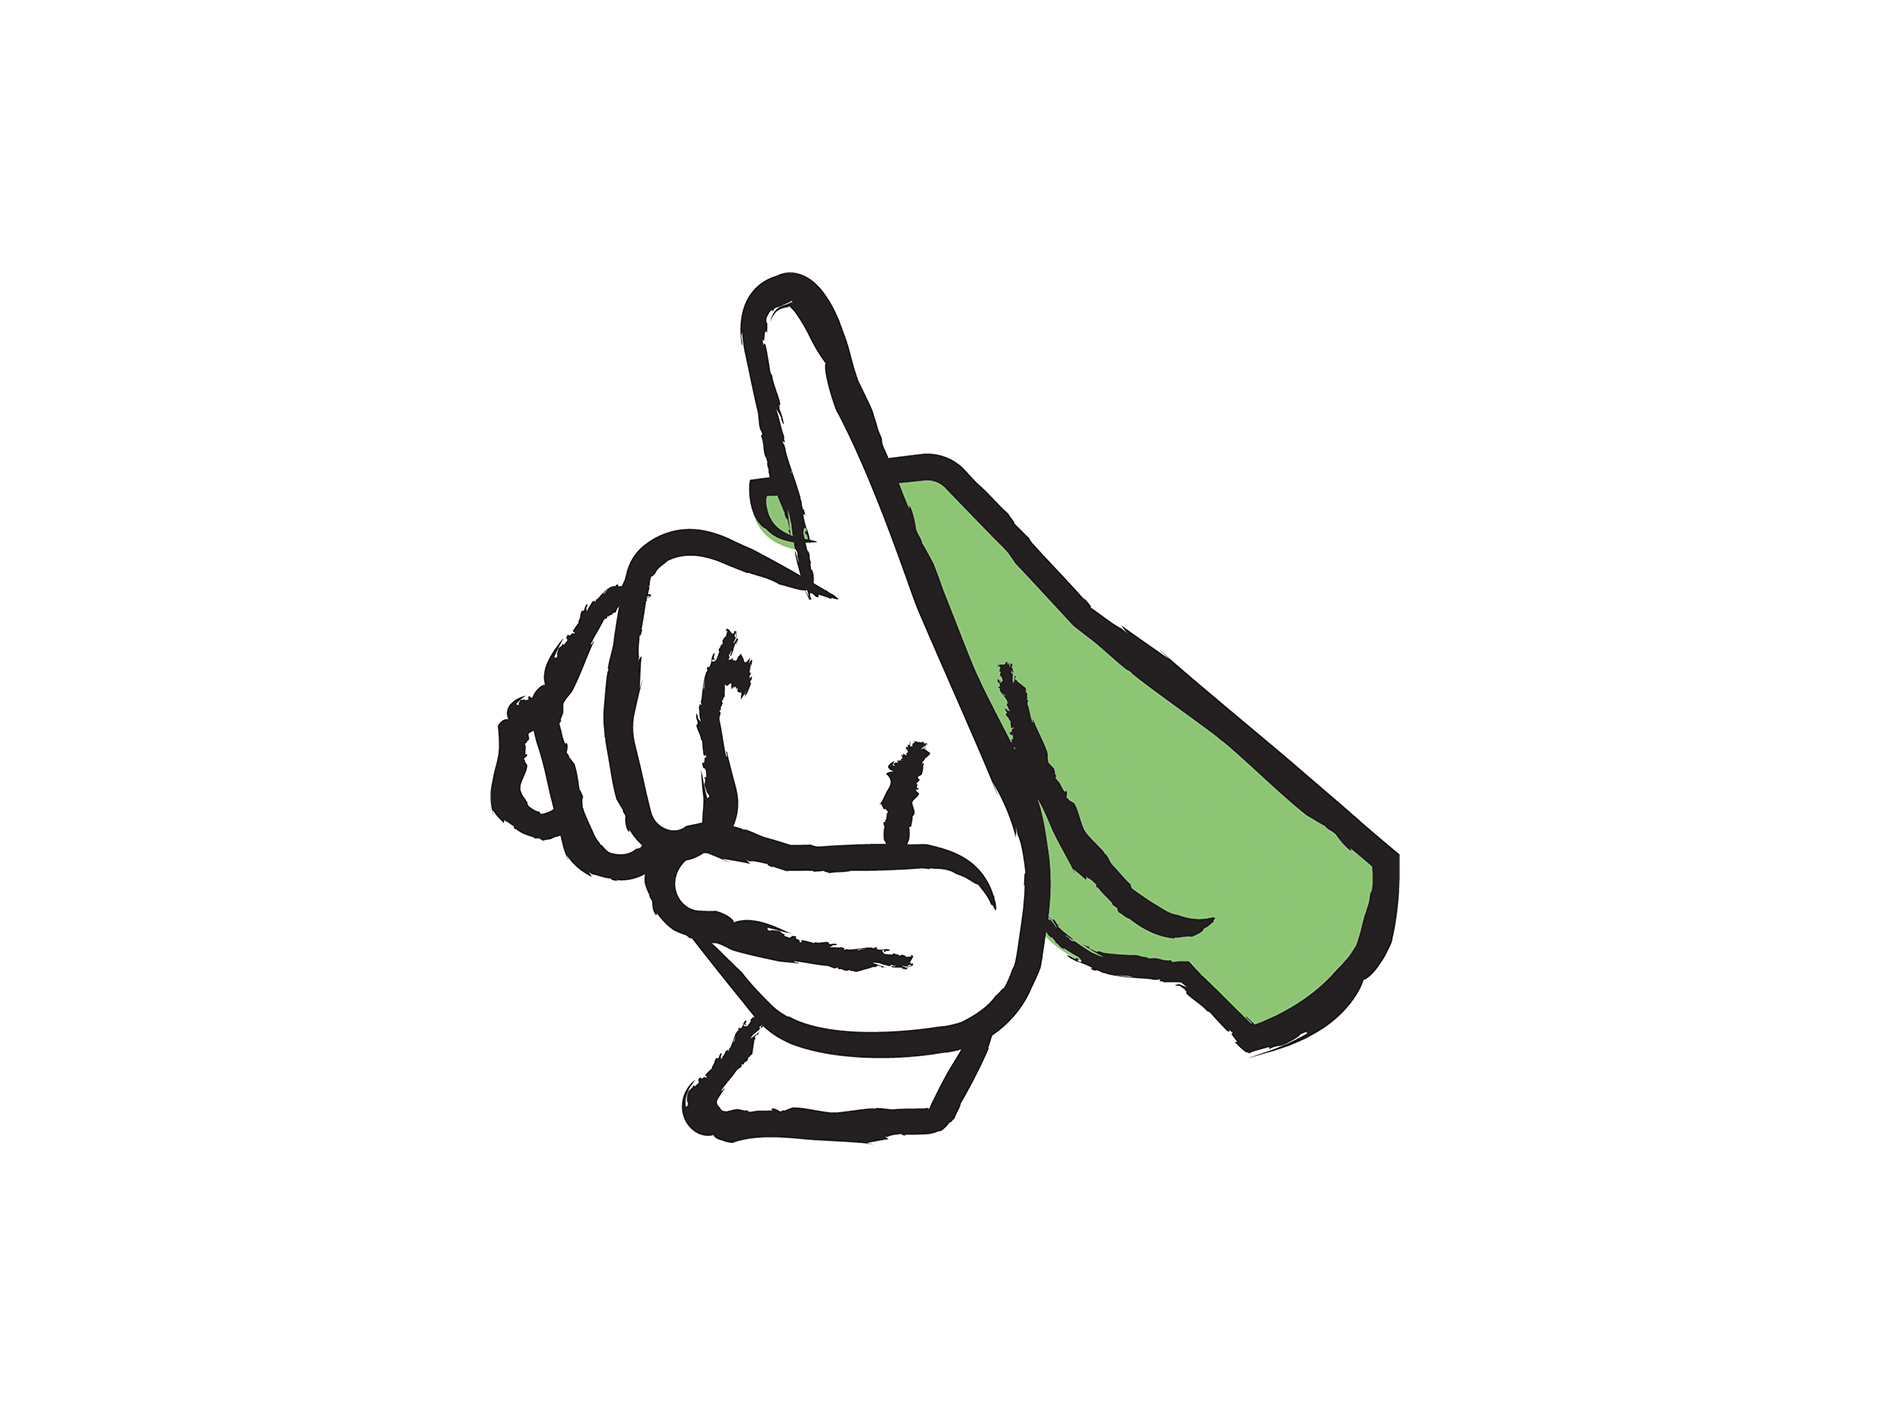 The tactile sign language icon. An illustration of a hand placed on top of a signer’s hand. The signer demonstrates the letter “D” in American Sign Language.